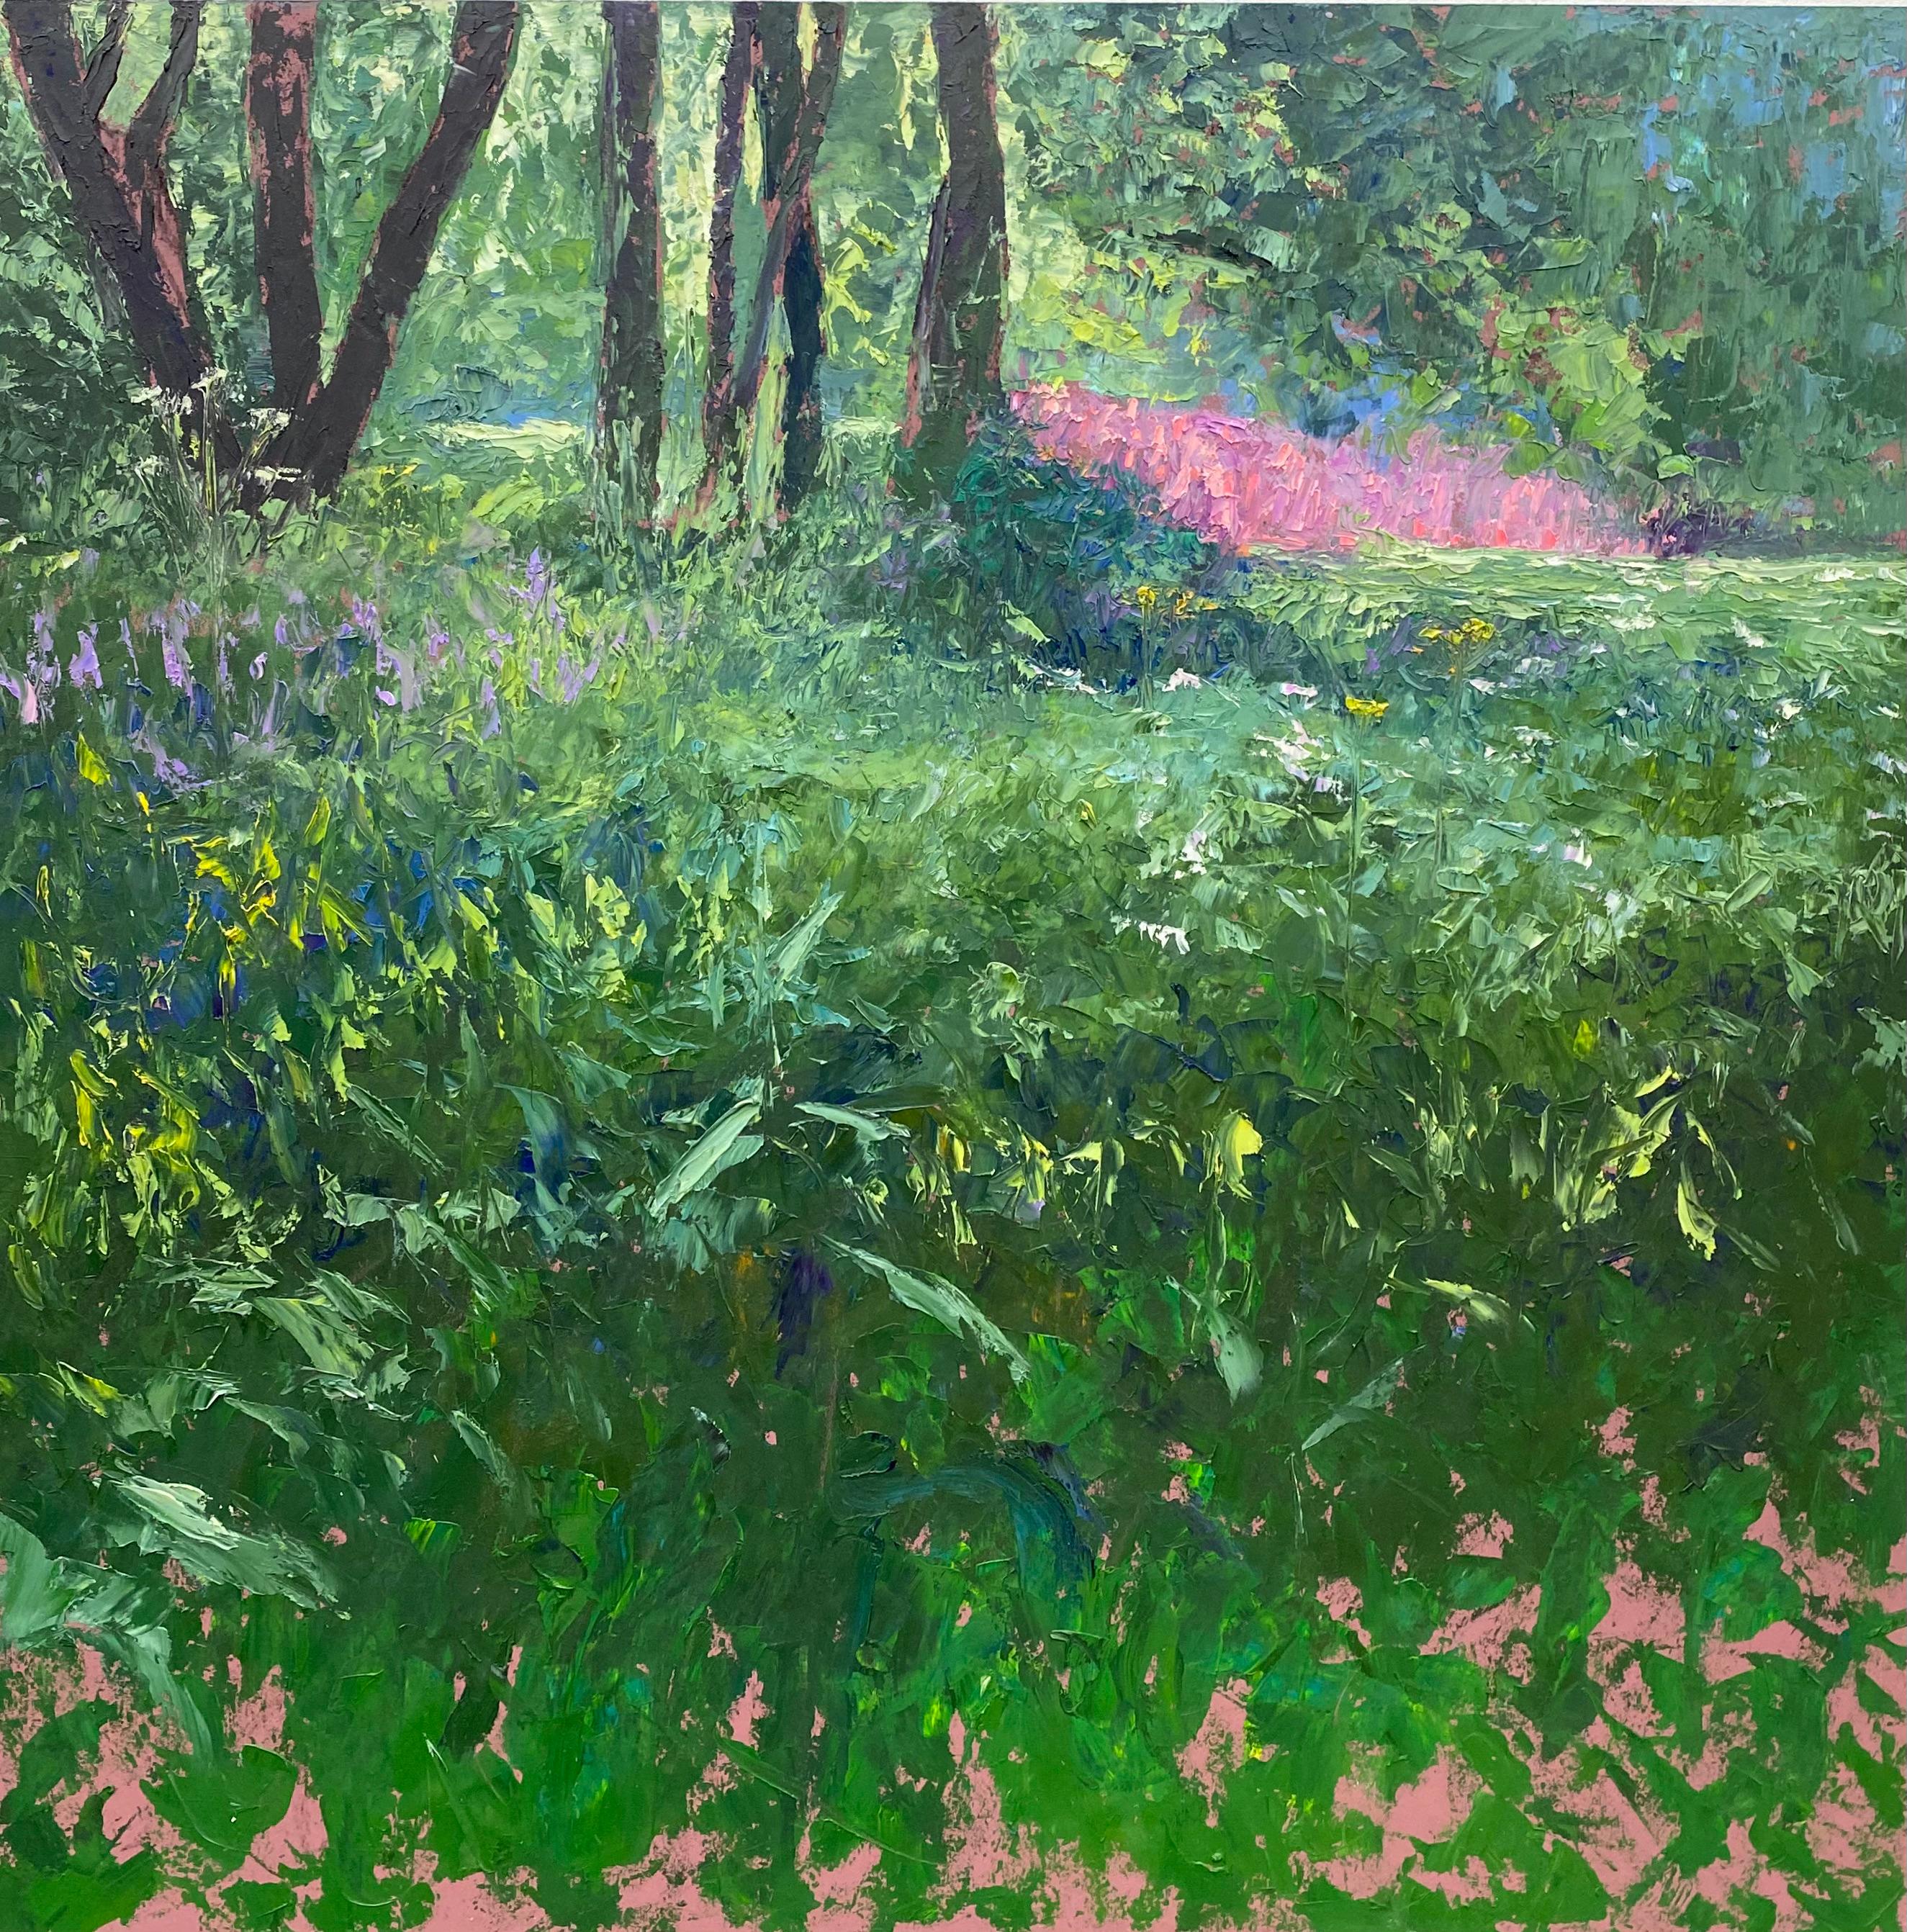 Ronald Soeliman Figurative Painting - Fireweed- 21st Century Contemporary Impressionistic Dutch Landscape Painting